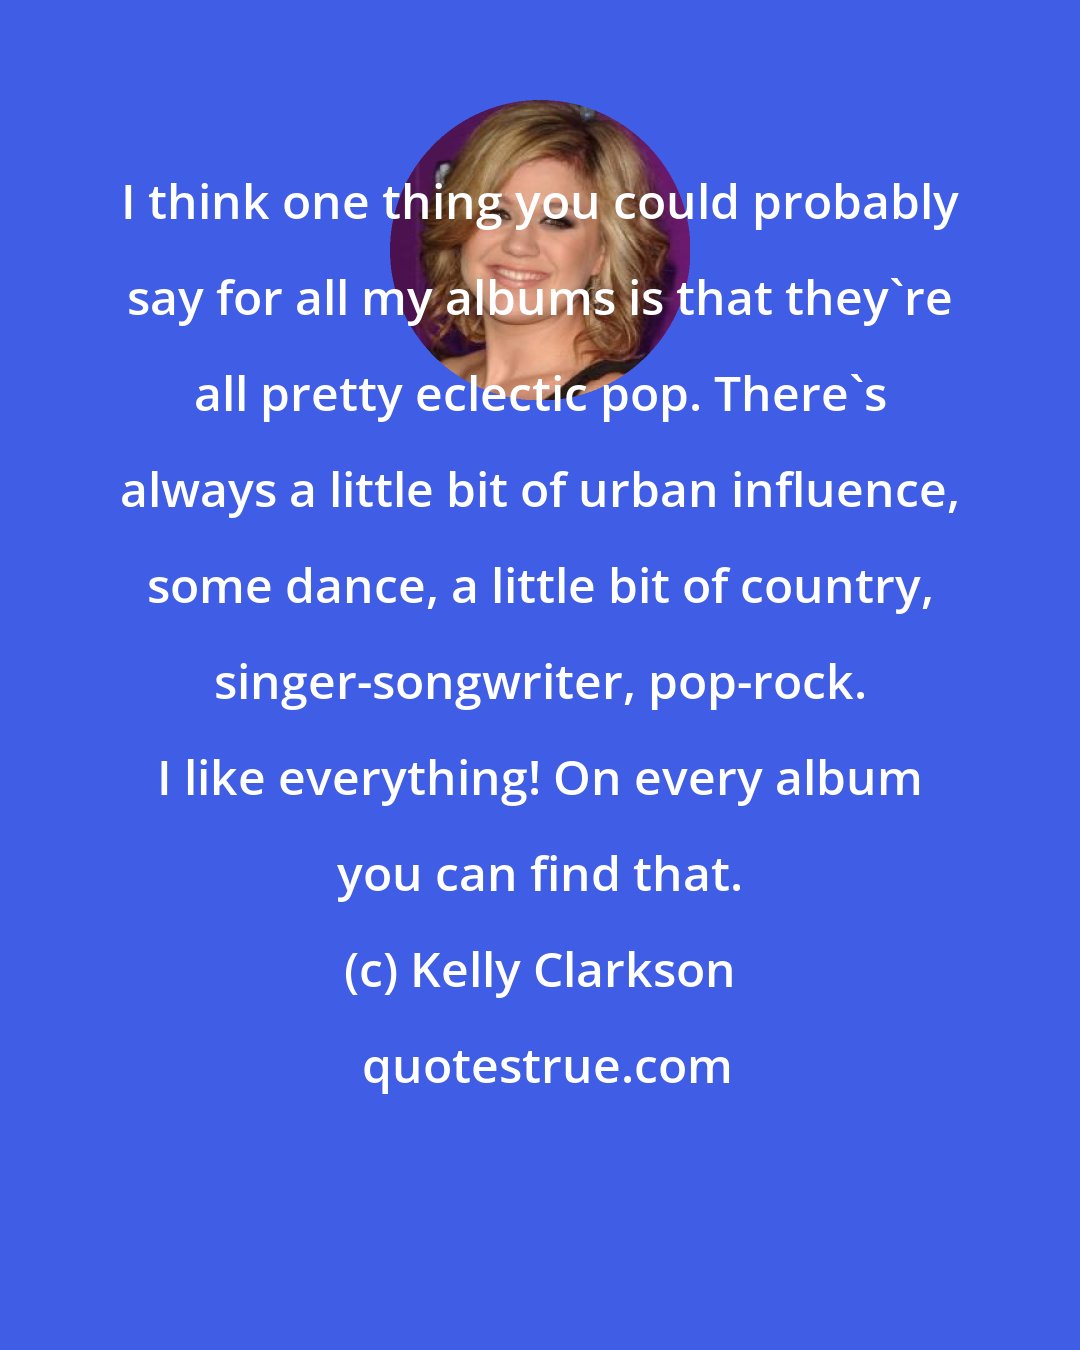 Kelly Clarkson: I think one thing you could probably say for all my albums is that they're all pretty eclectic pop. There's always a little bit of urban influence, some dance, a little bit of country, singer-songwriter, pop-rock. I like everything! On every album you can find that.